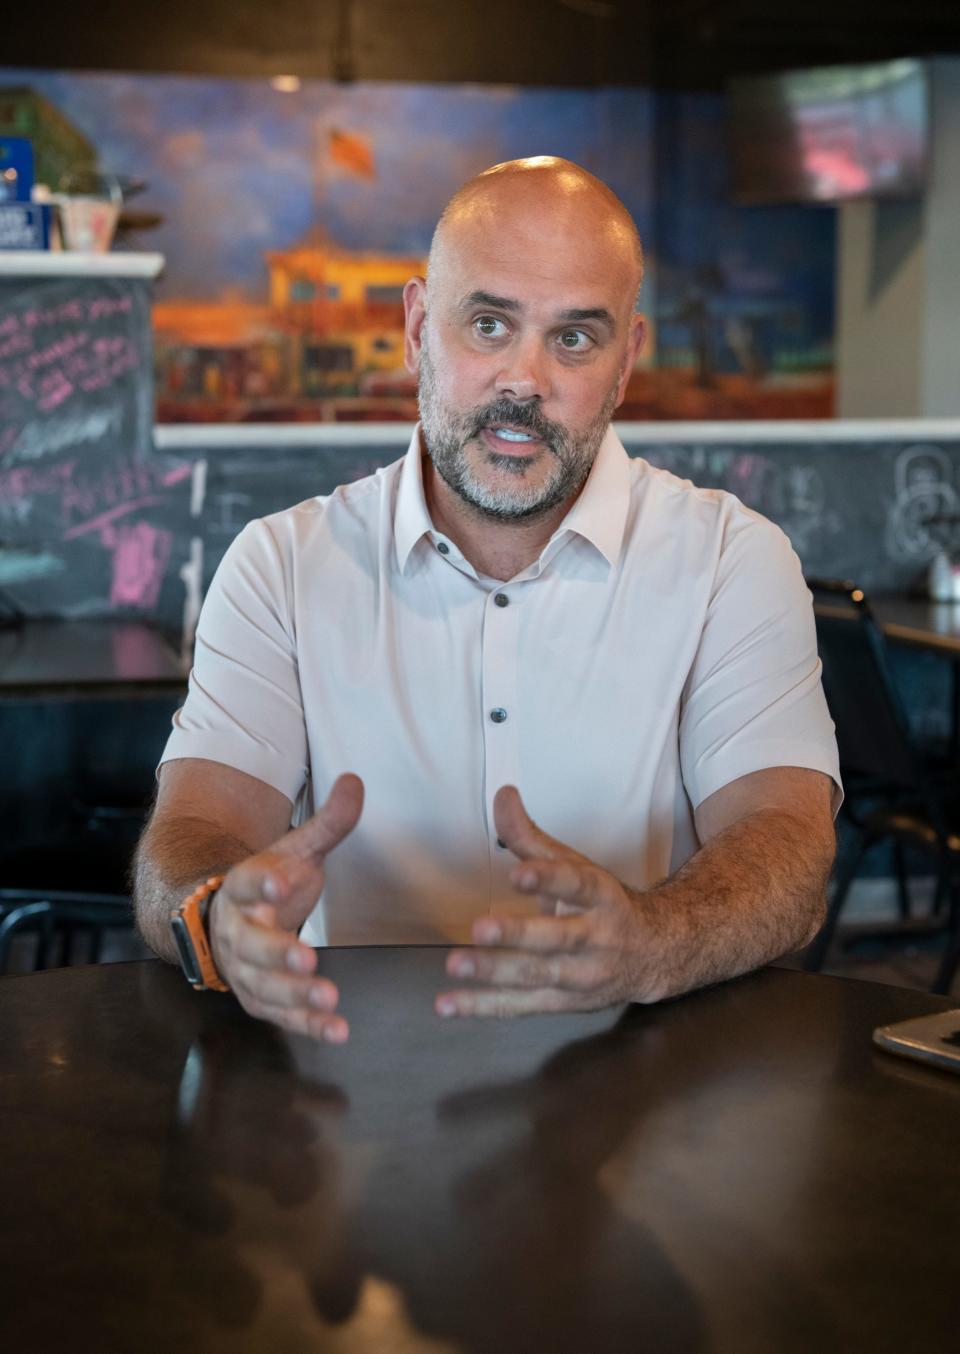 Chance Walsh, owner of Lillian's PIzza restaurant, talks about running for Escambia County District 2 Commissioner in Perdido on Monday, July 18, 2022.